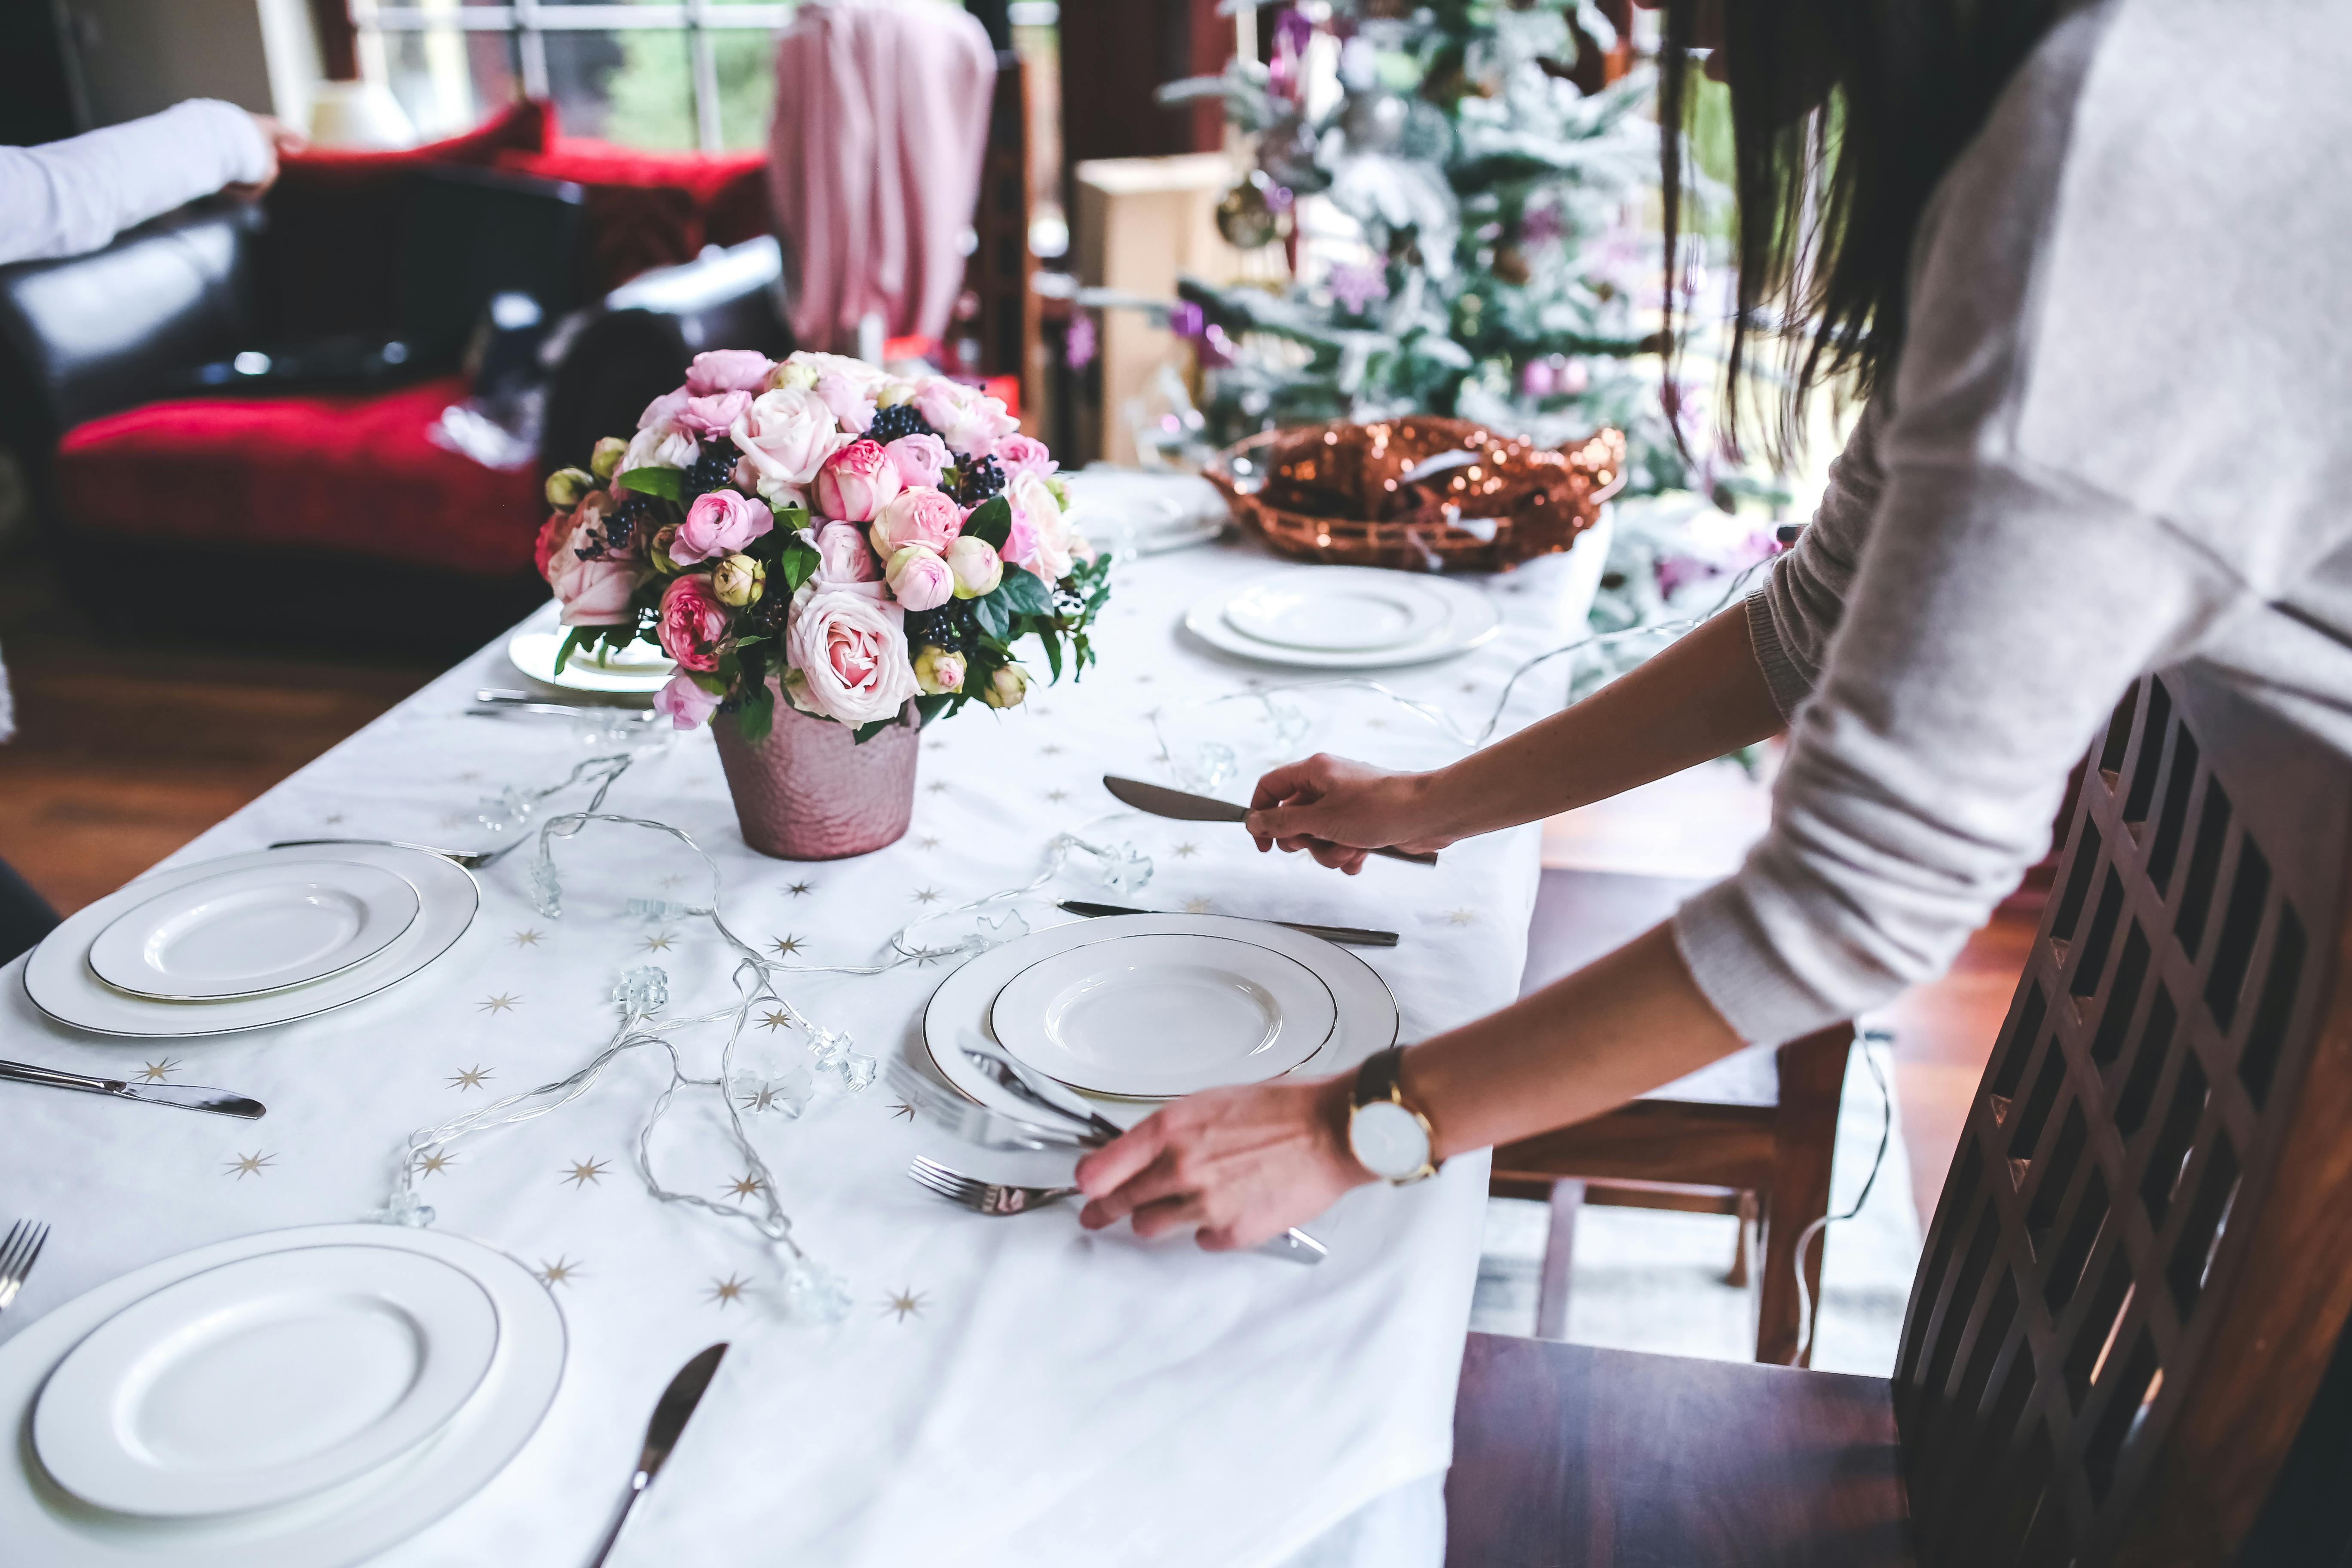 Woman preparing the table at a restaurant. | Photo: Pexels